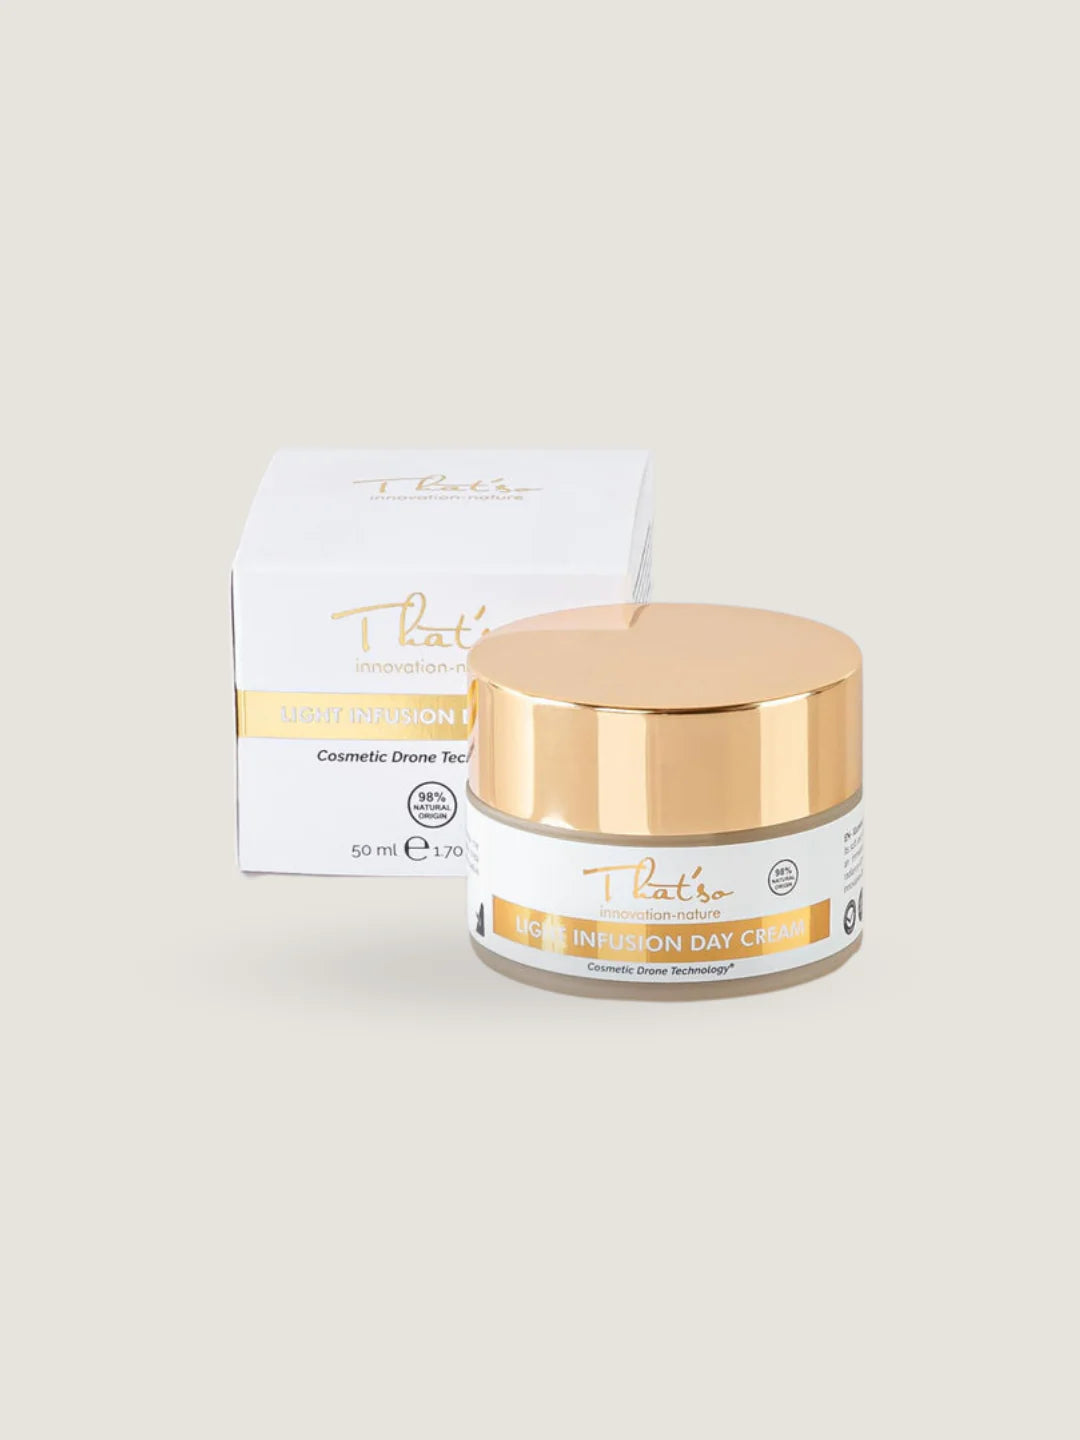 Innovation Nature – Anti-aging light infusion day cream